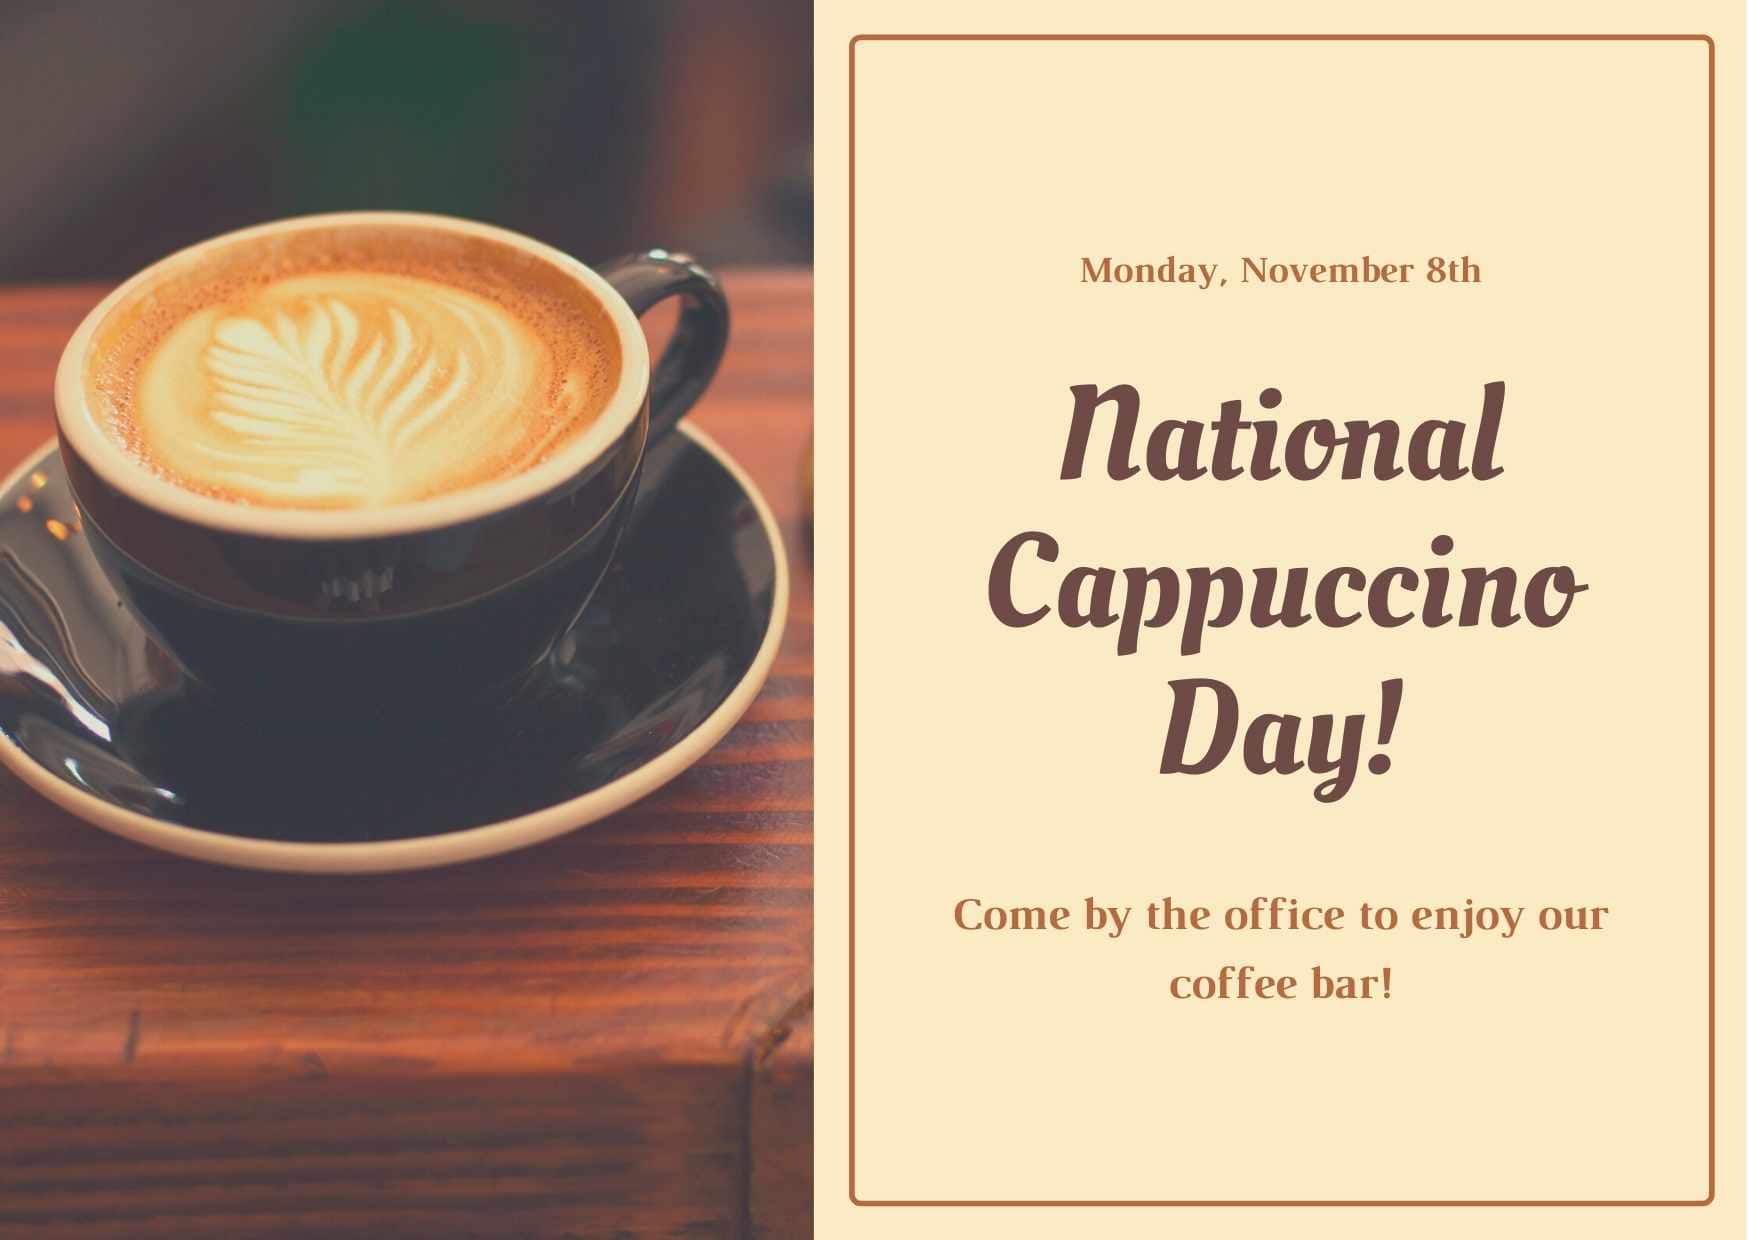 Celebrate National Cappuccino Day at apartments in The Woodlands TX with delicious cappuccinos served right at your doorstep. Find the perfect apartment for rent woodlands tx and indulge in this